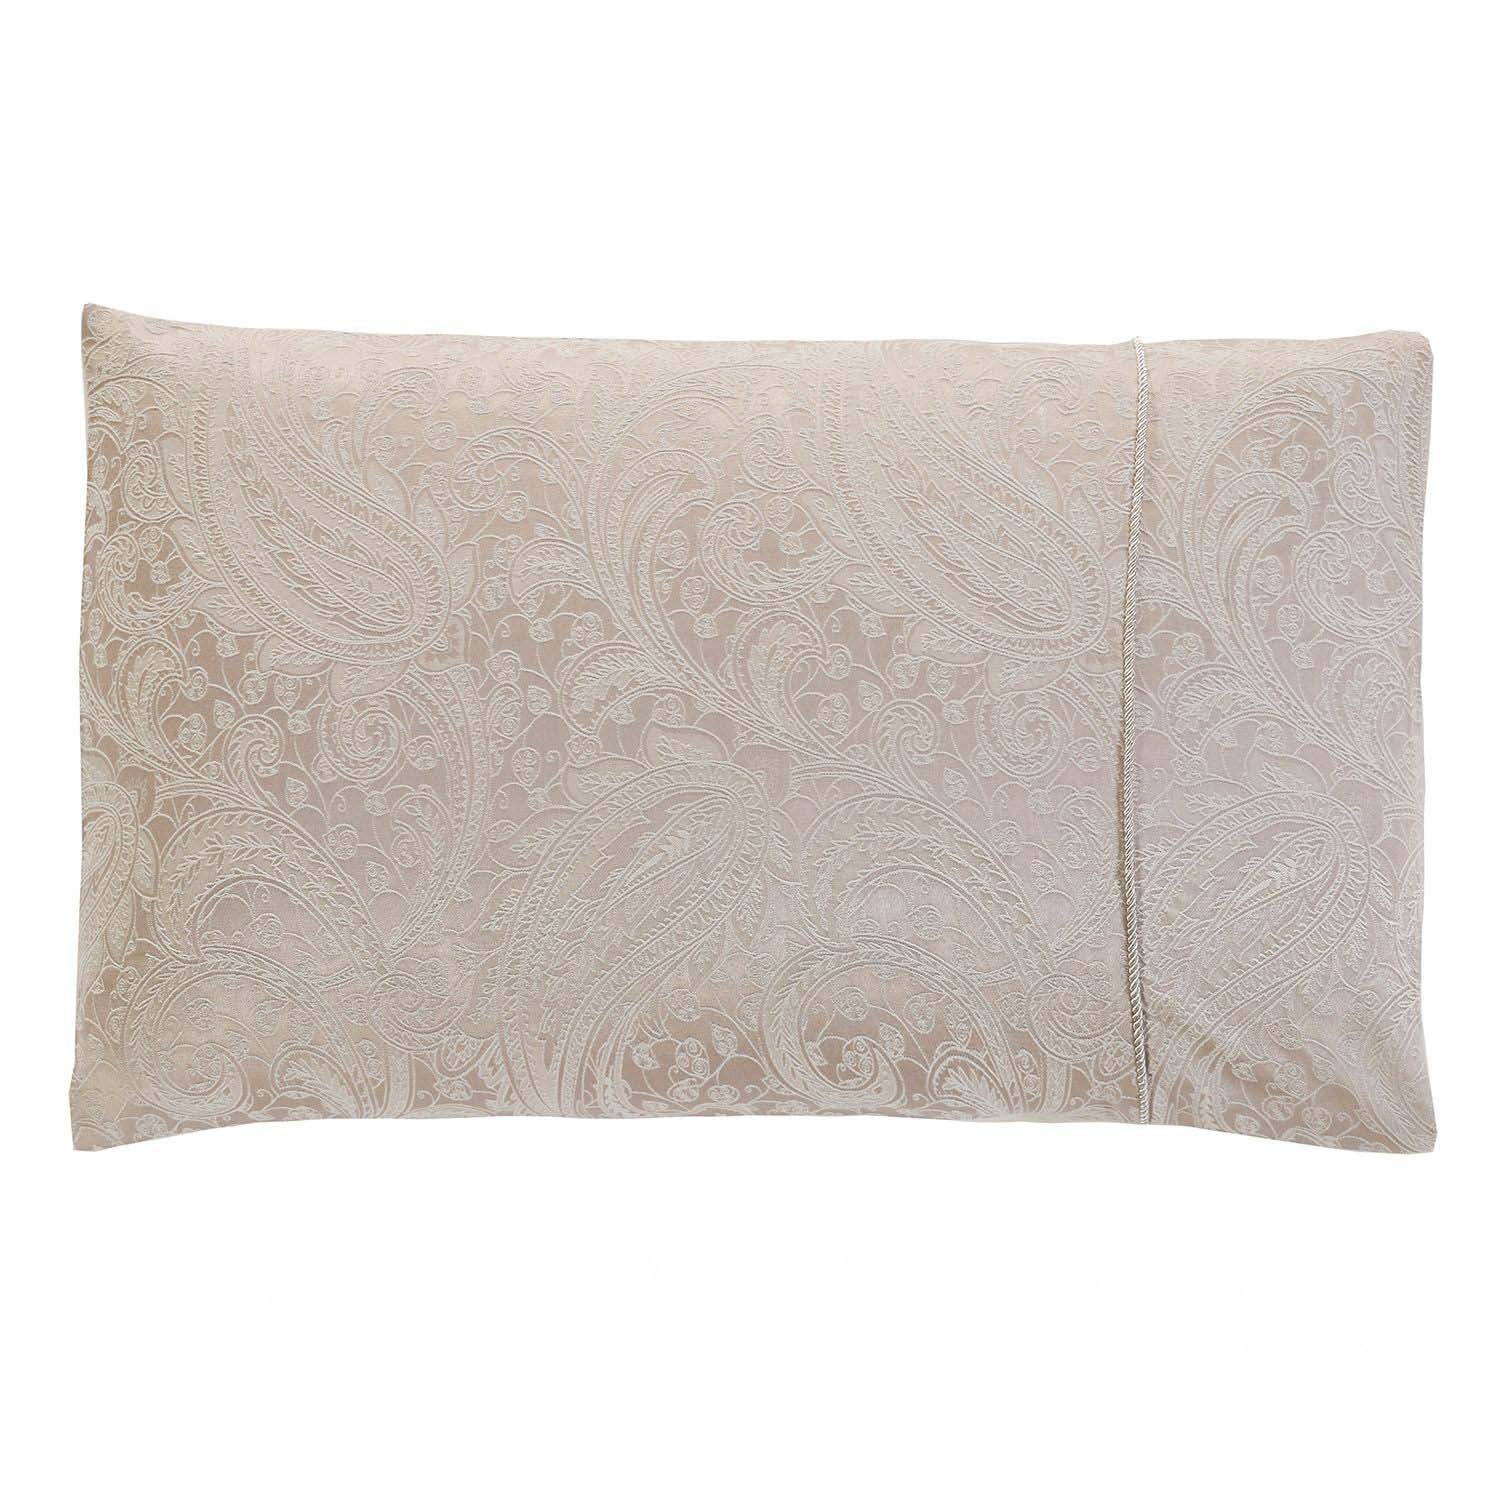 Julian Charles Paisley Housewife Pillowcase 1 Shaws Department Stores